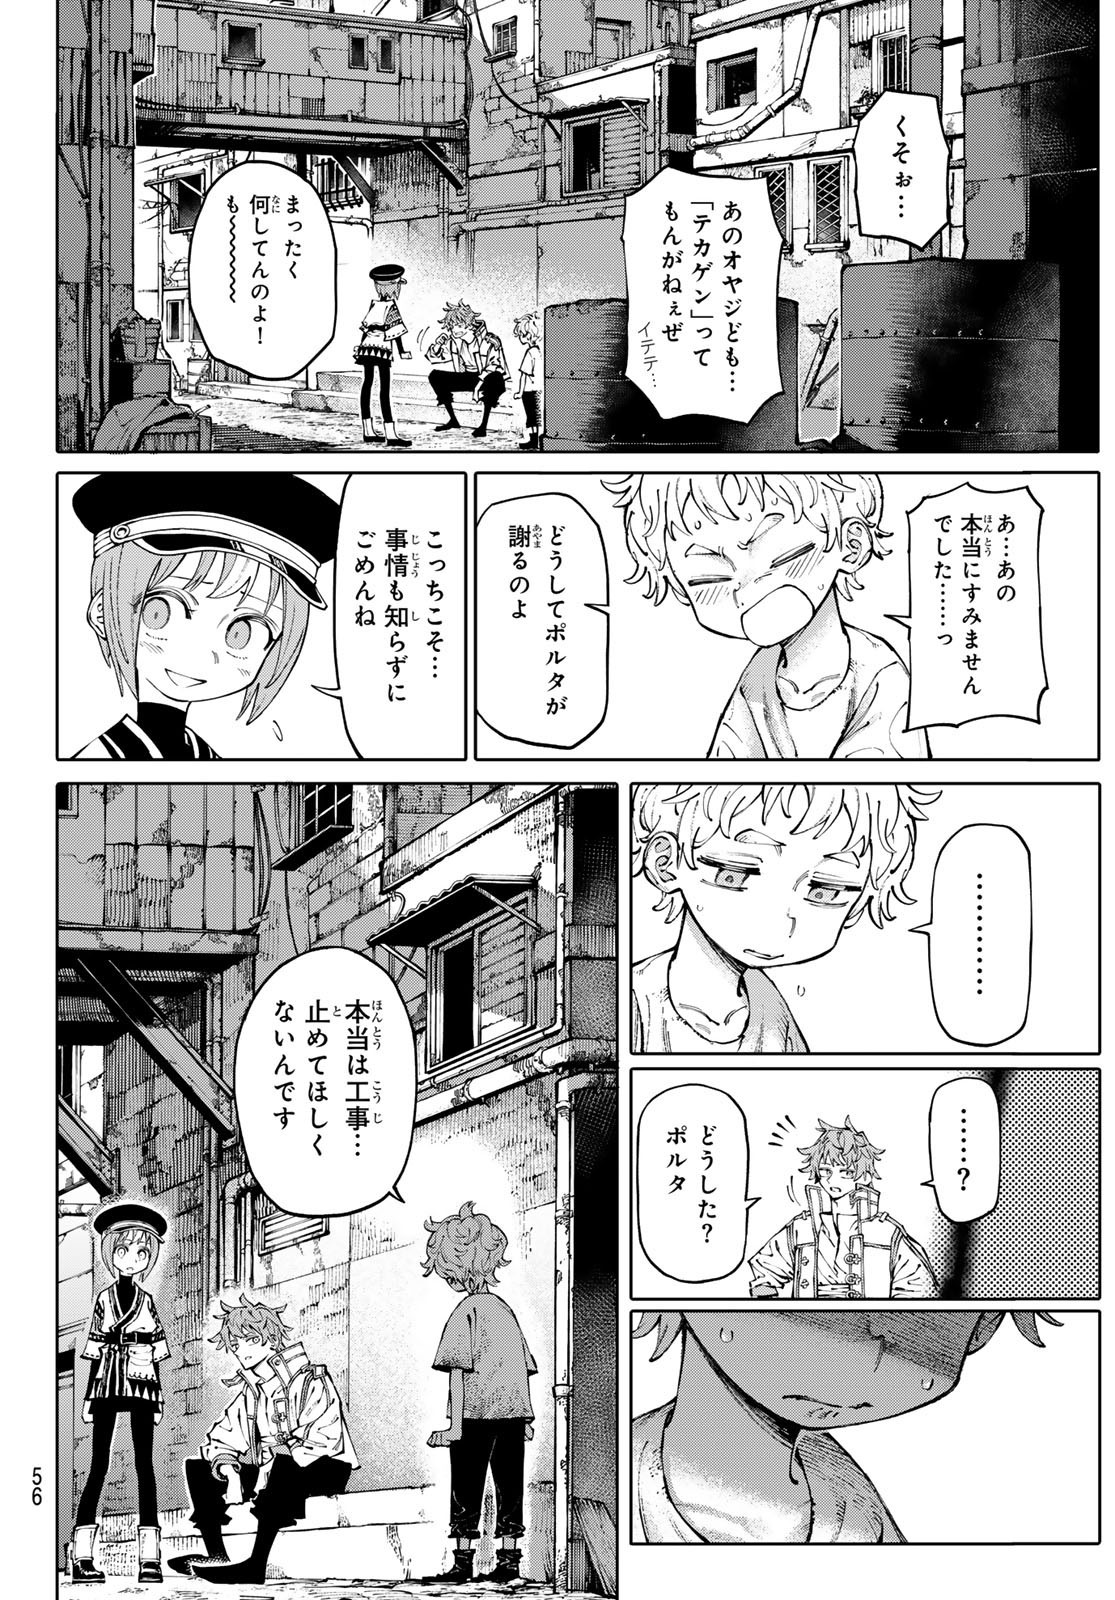 Weekly Shōnen Magazine - 週刊少年マガジン - Chapter 2024-34 - Page 53